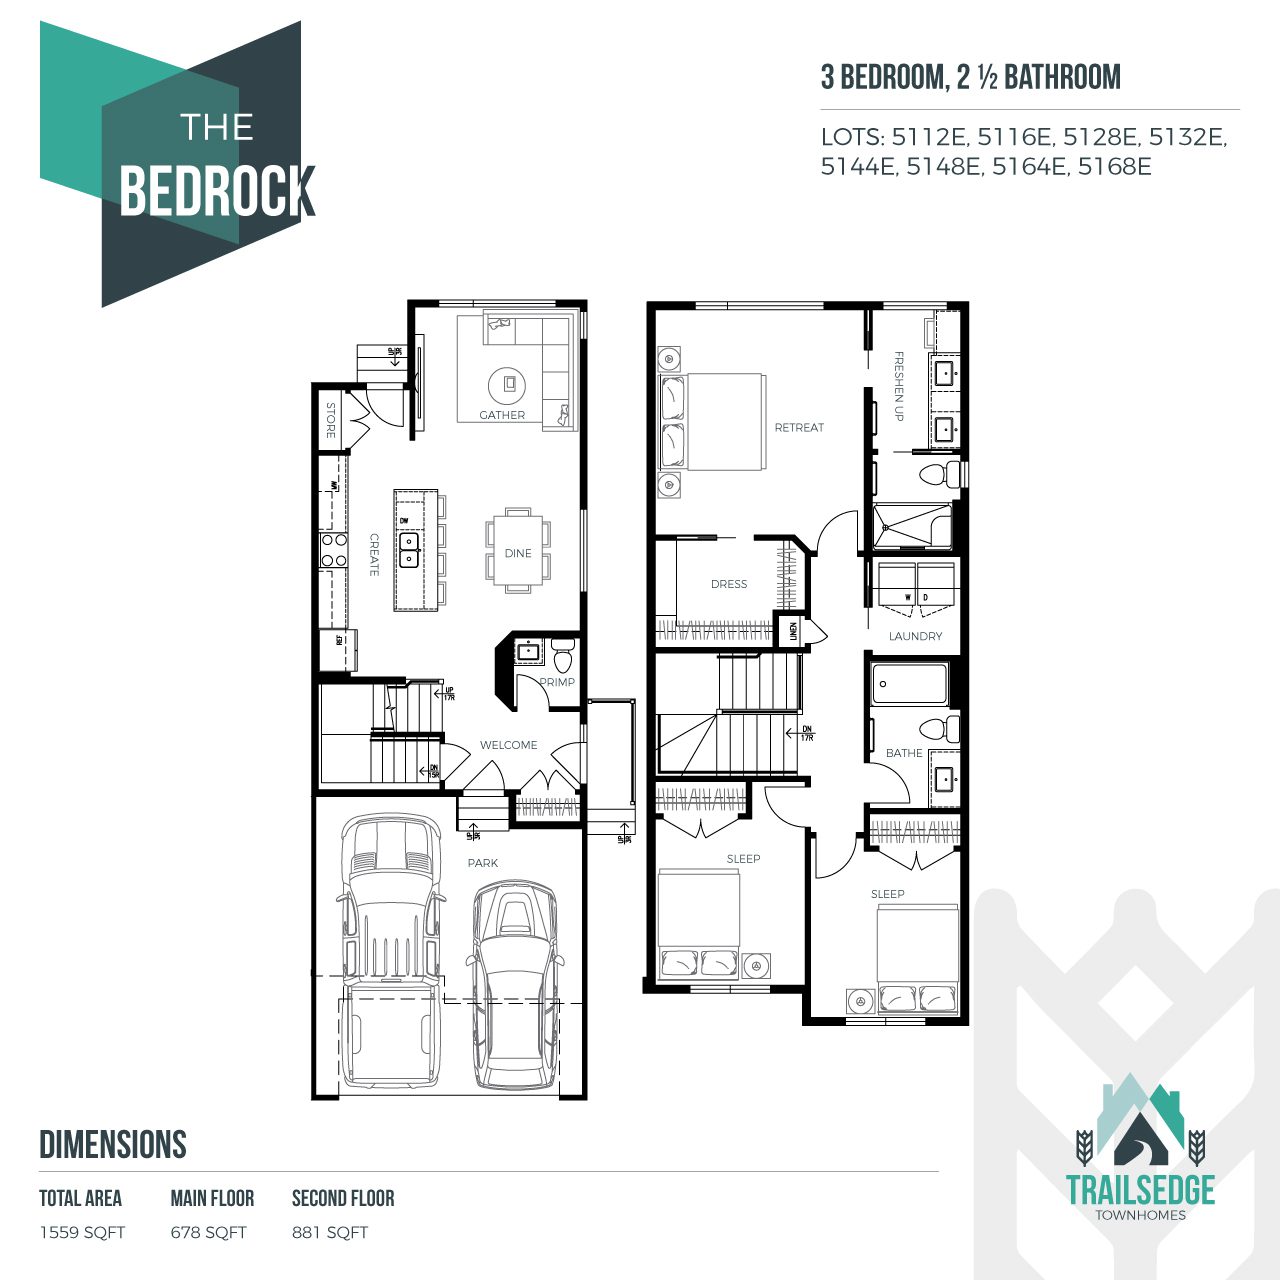 The berck floor plan with two bedrooms and two bathrooms.